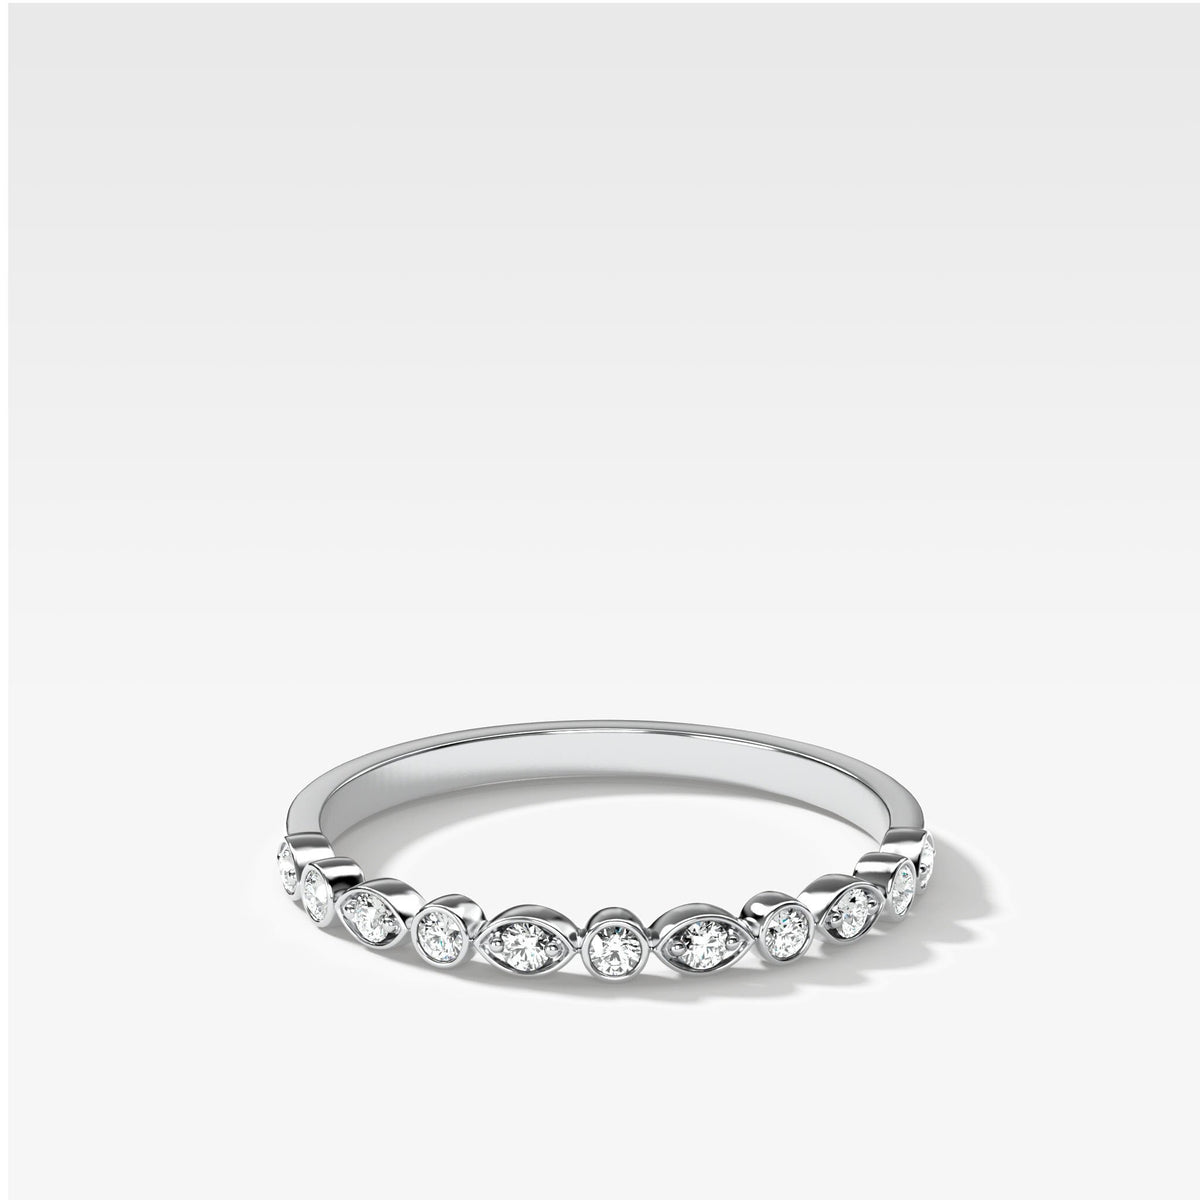 Scalloped Diamond Stacker by Good Stone in White Gold